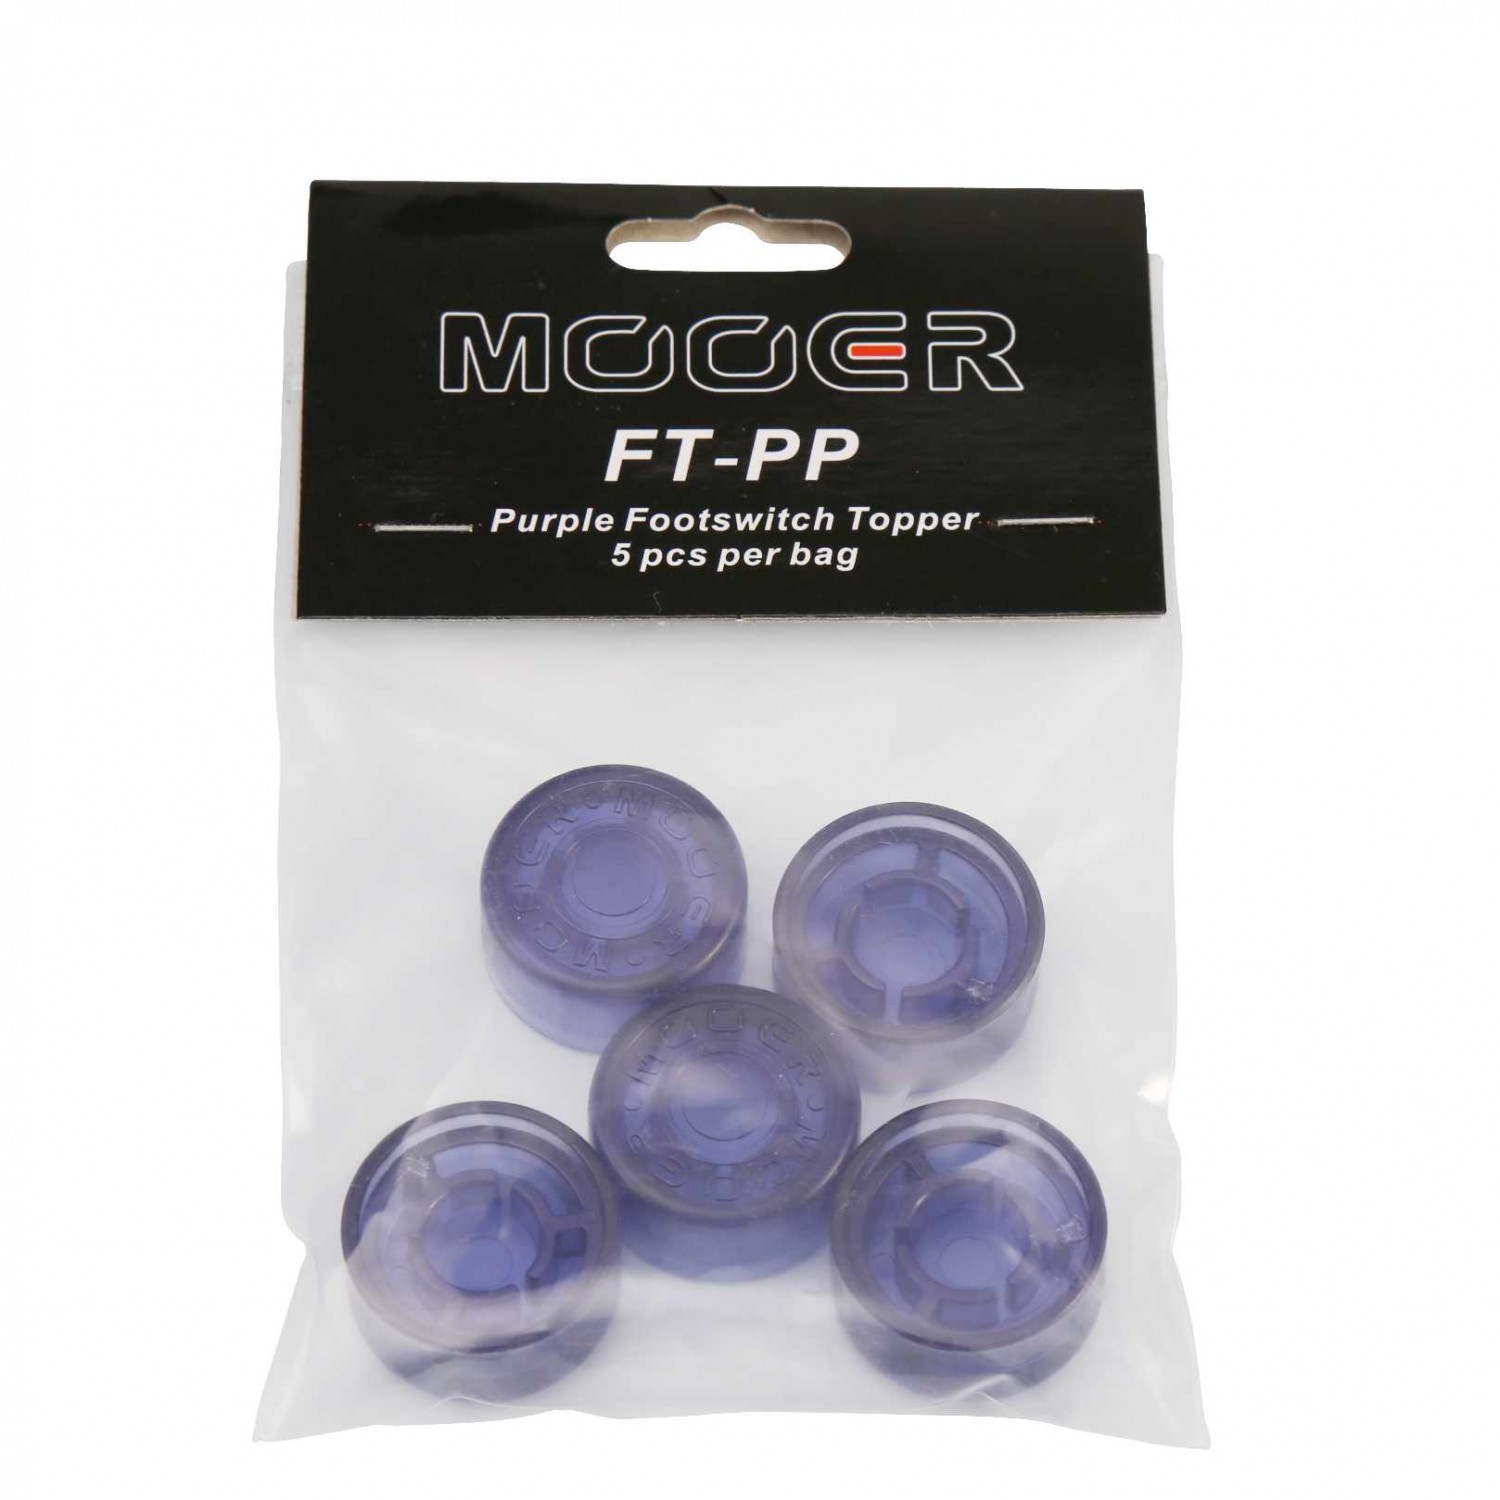 Mooer Candy Footswitch Topper, purple, 5 pcs.